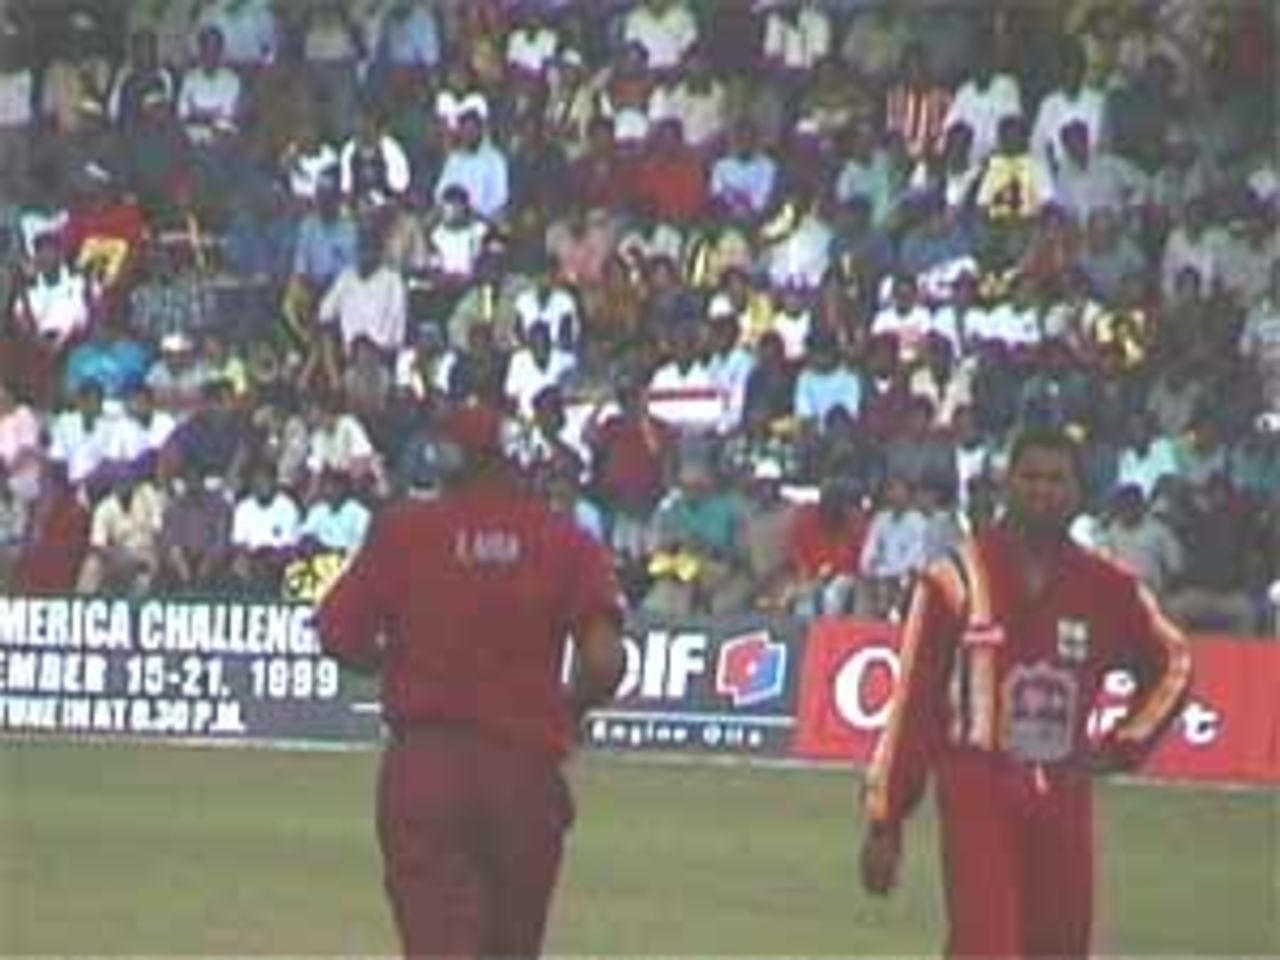 Lara and Chanderpaul ponder the proceedings, India v West Indies (Final), Coca-Cola Singapore Challenge, 1999-2000, Kallang Ground, Singapore, 7 Sep 1999.